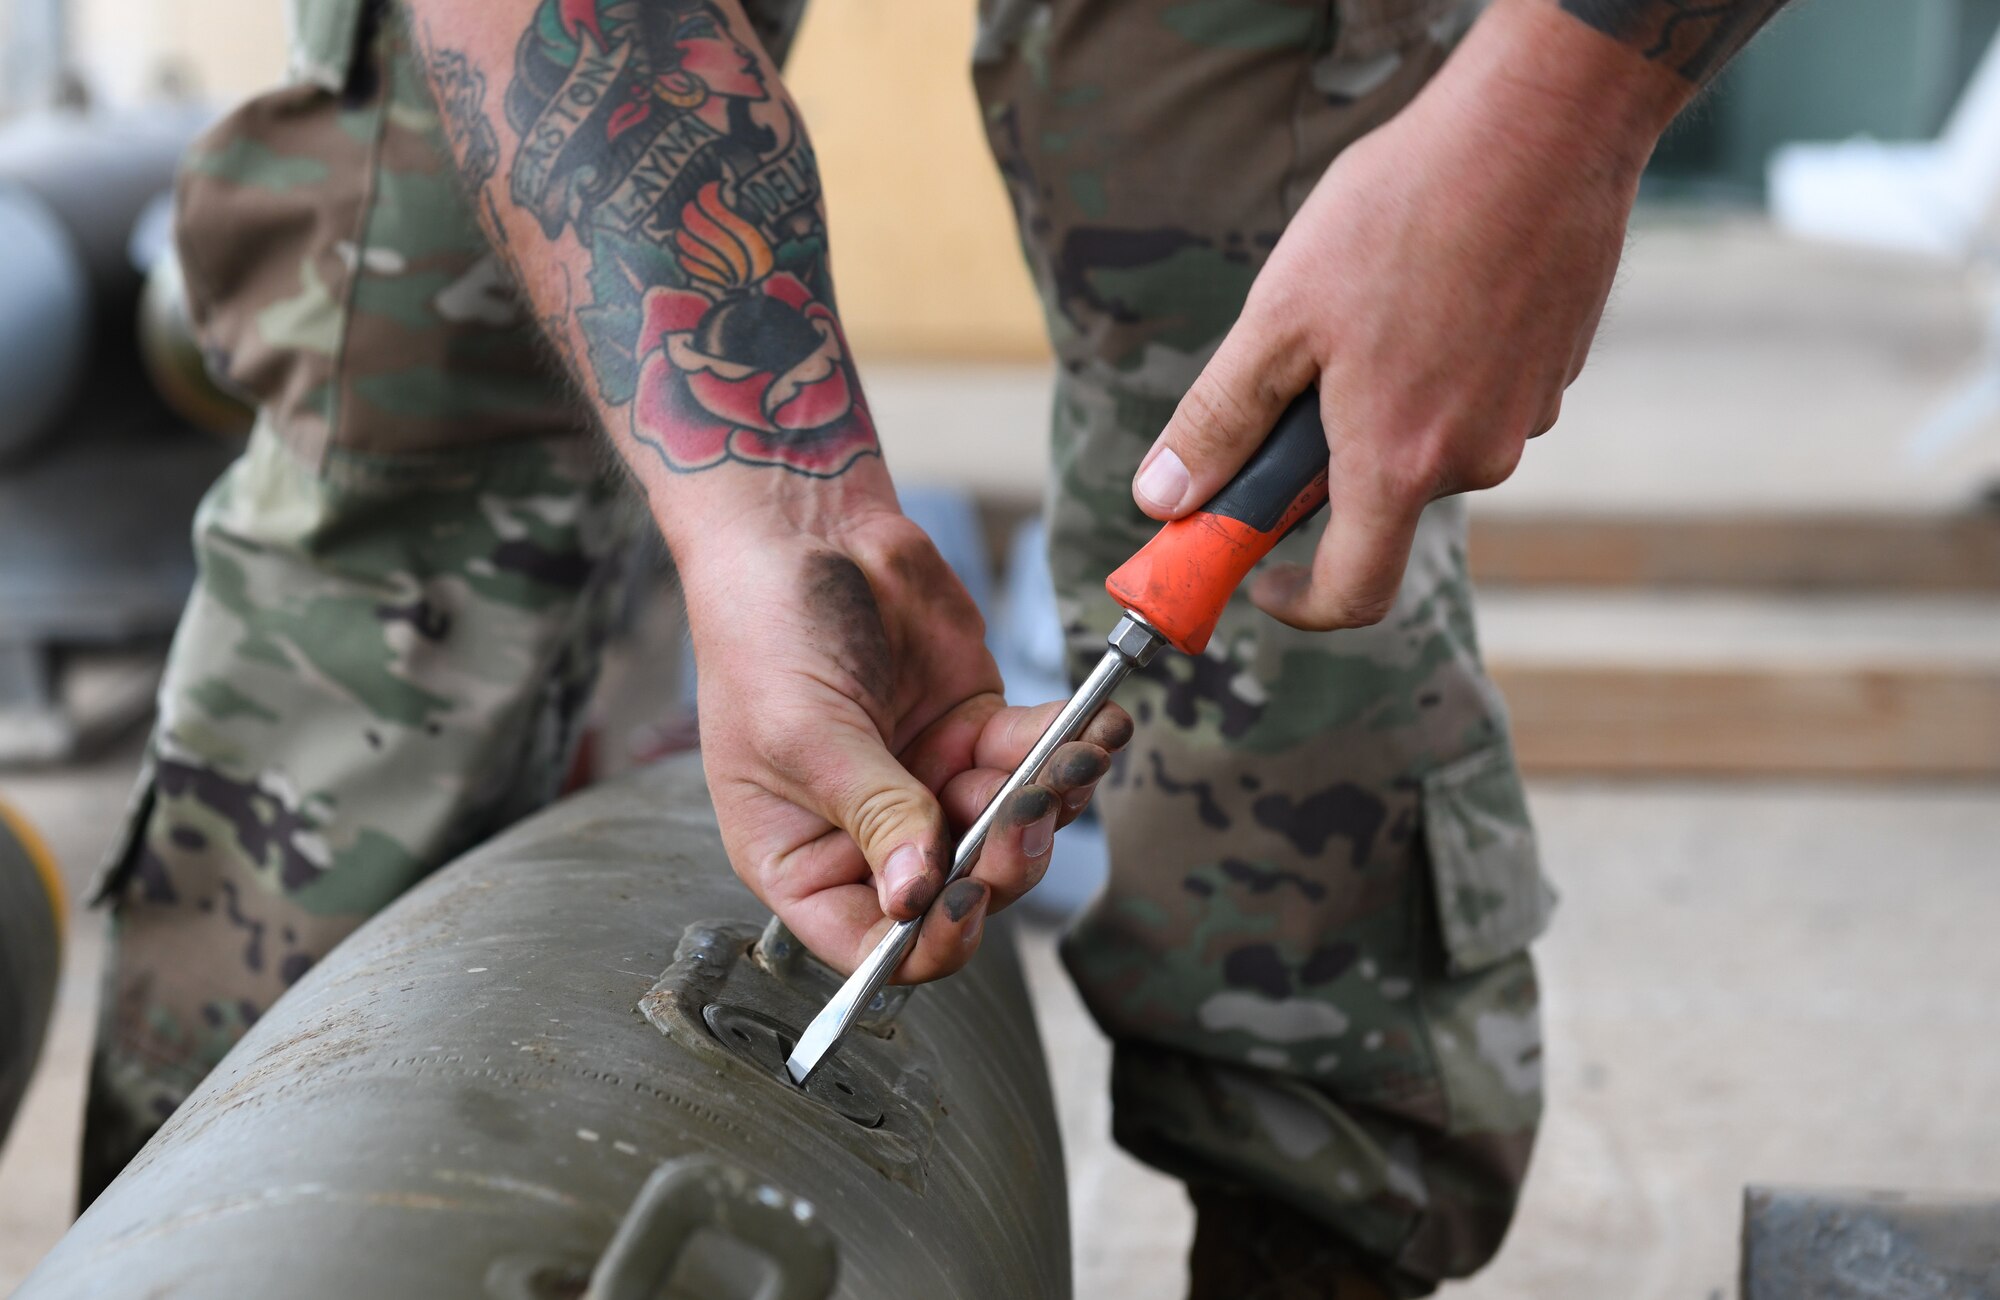 U.S. Air Force Tech. Sgt. Brandon Coleman, 726th Expeditionary Air Base Squadron senior munitions inspector, prepares munitions for assembly during a bomb build at Chabelley Airfield, Djibouti, Nov. 12, 2019. The 726th EABS Munitions Systems Airmen build, inspect and store all munitions at the airfield, ensuring mission effectiveness at a moment’s notice. (U.S. Air Force photo by Staff Sgt. Alex Fox Echols III)